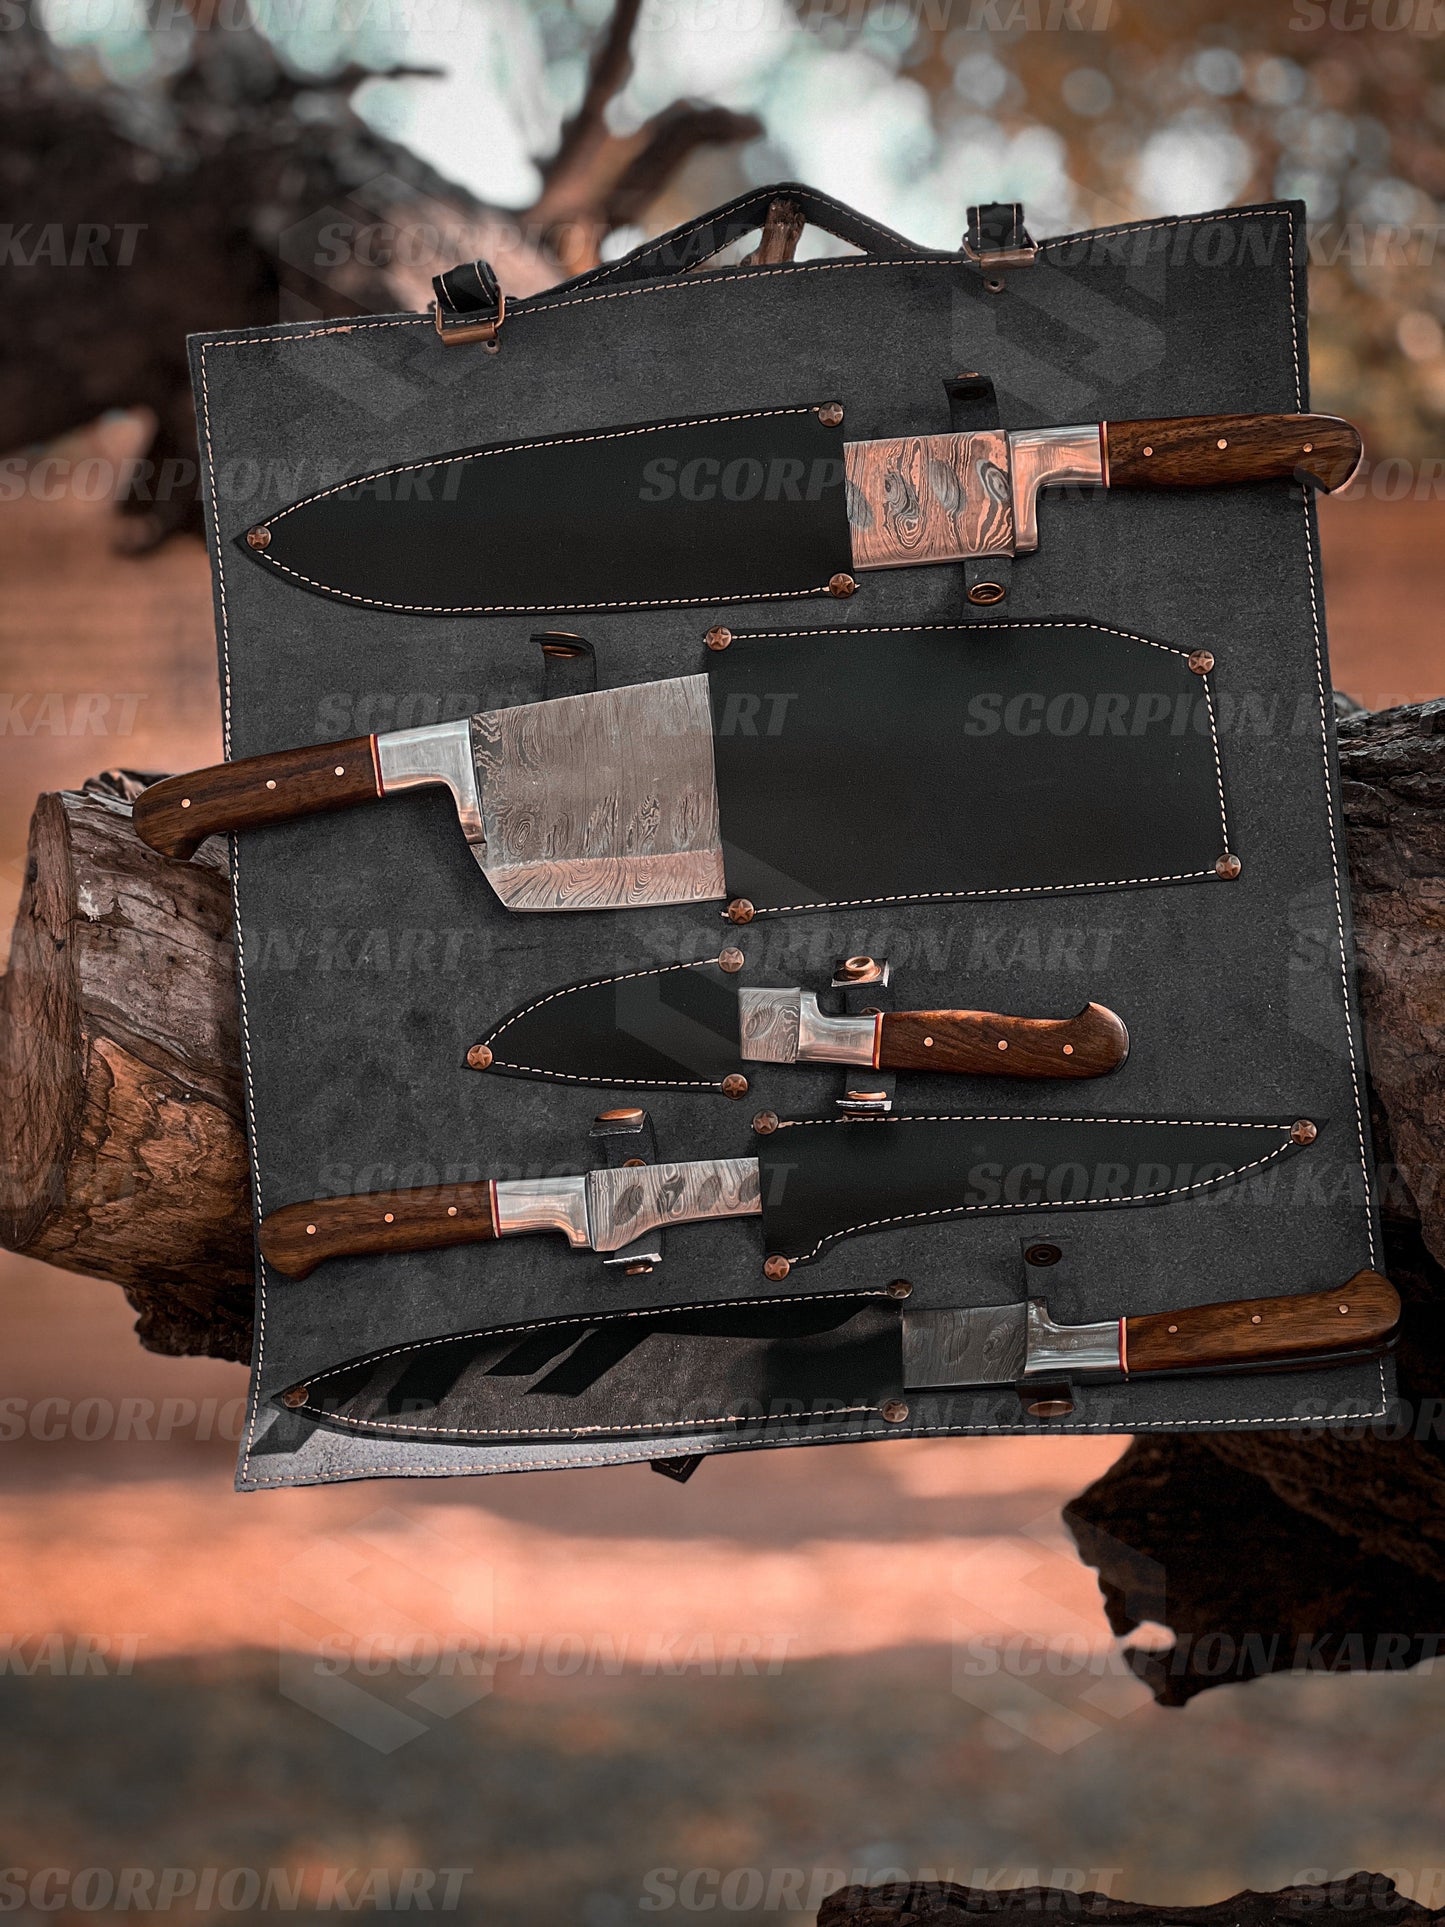 5-Piece Henkel Rosewood + Special Burl Pro Chef's Knife Set - Elevate Your Culinary Experience this Autumn and Perfect for Thanksgiving & Christmas Gifting - Premium best Happy Valentine Day gift from SCORPION KART - Just $170! Shop now at SCORPION KART